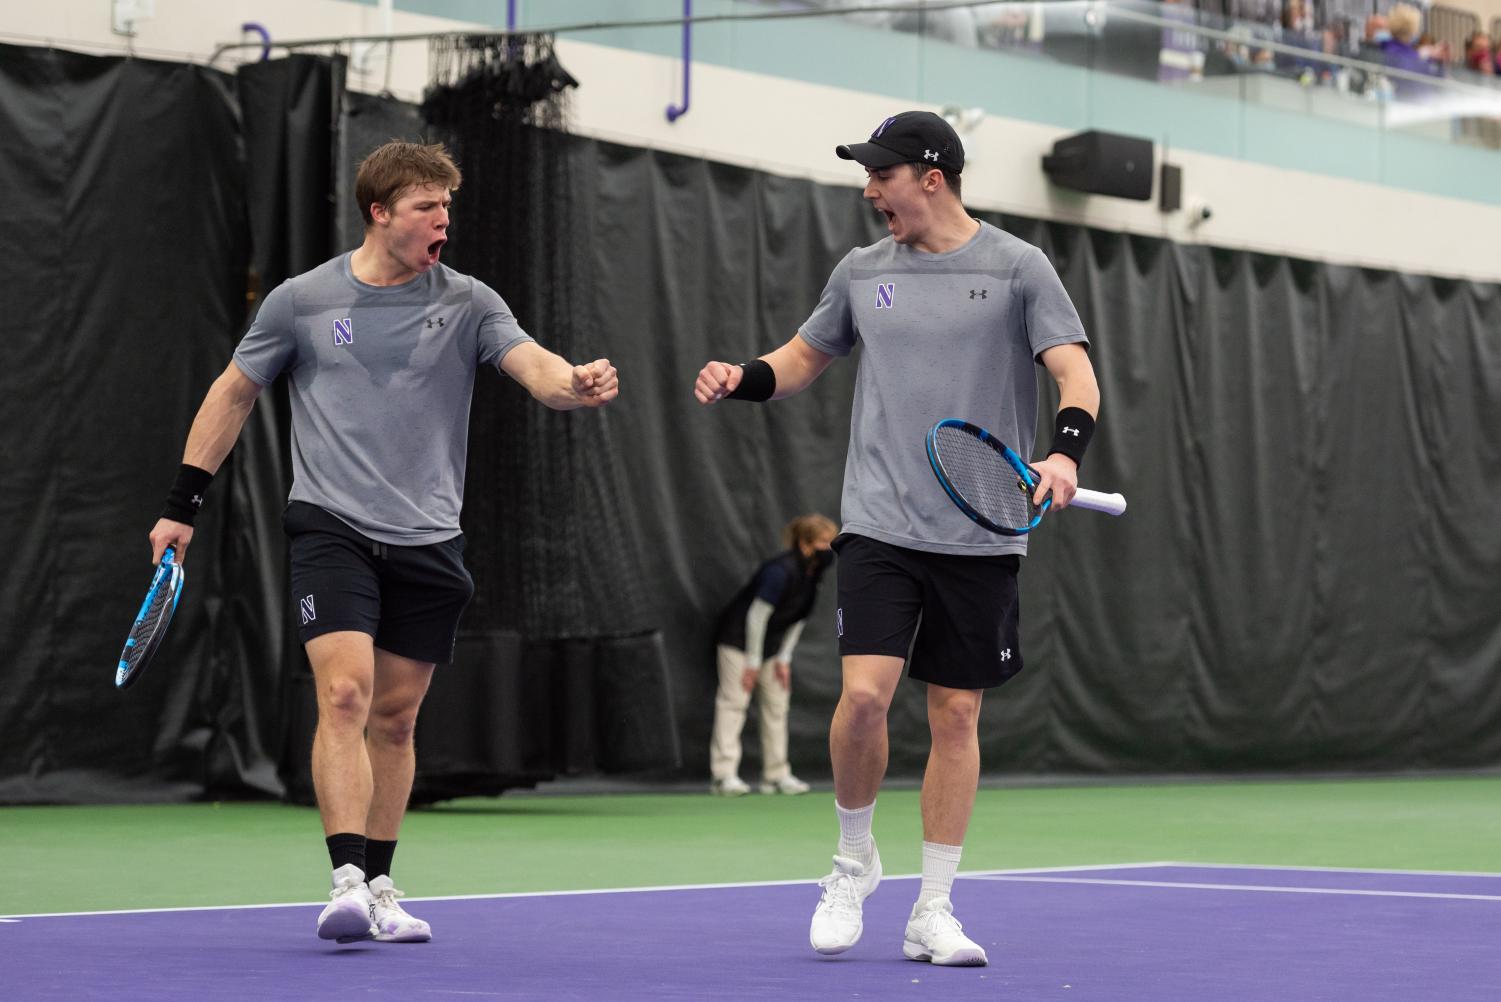 Two+tennis+players+in+gray+shirts+and+black+shorts%2C+each+holding+a+racquet%2C+fist+bump.